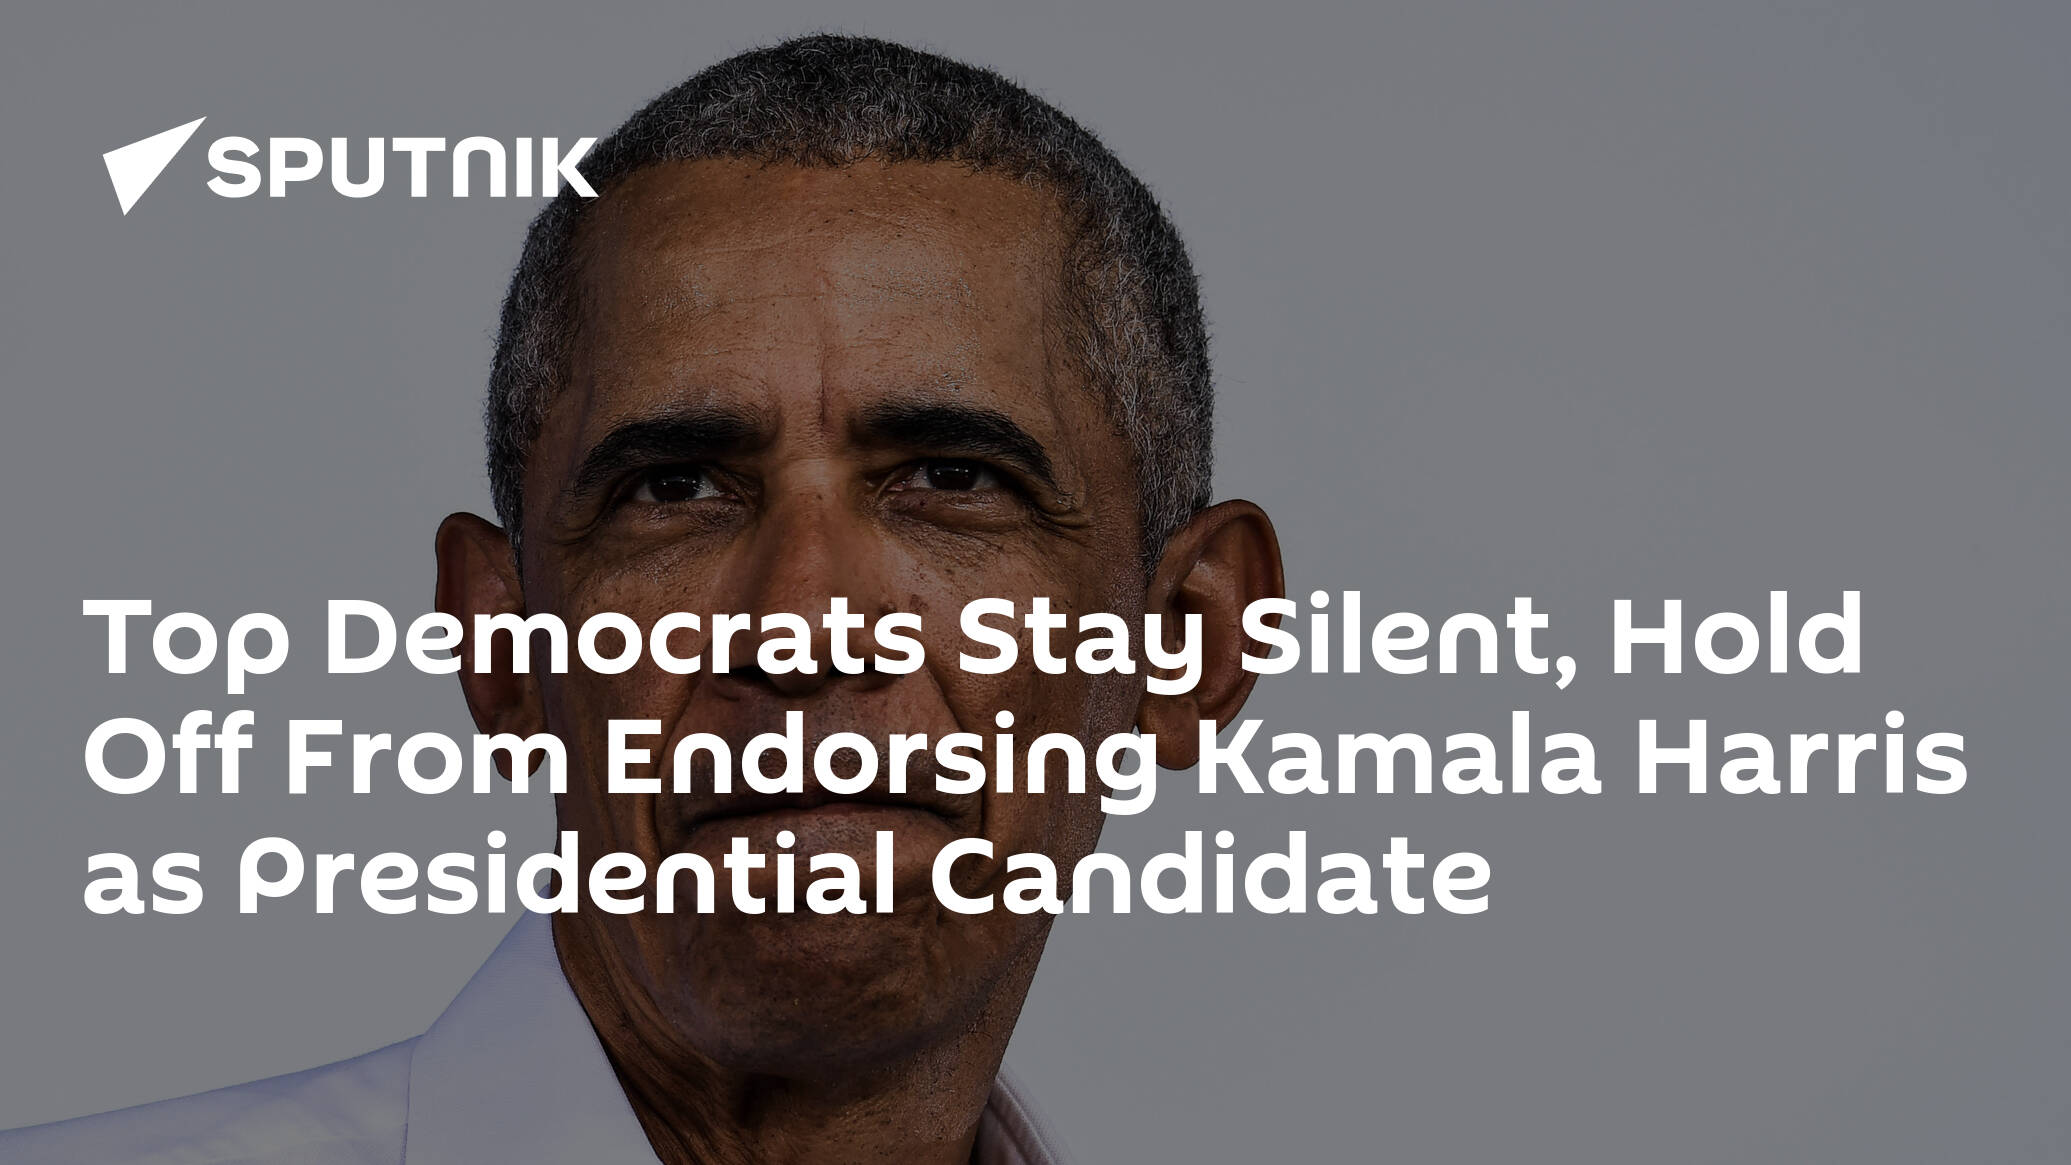 Top Democrats Stay Silent, Hold Off From Endorsing Kamala Harris as Presidential Candidate